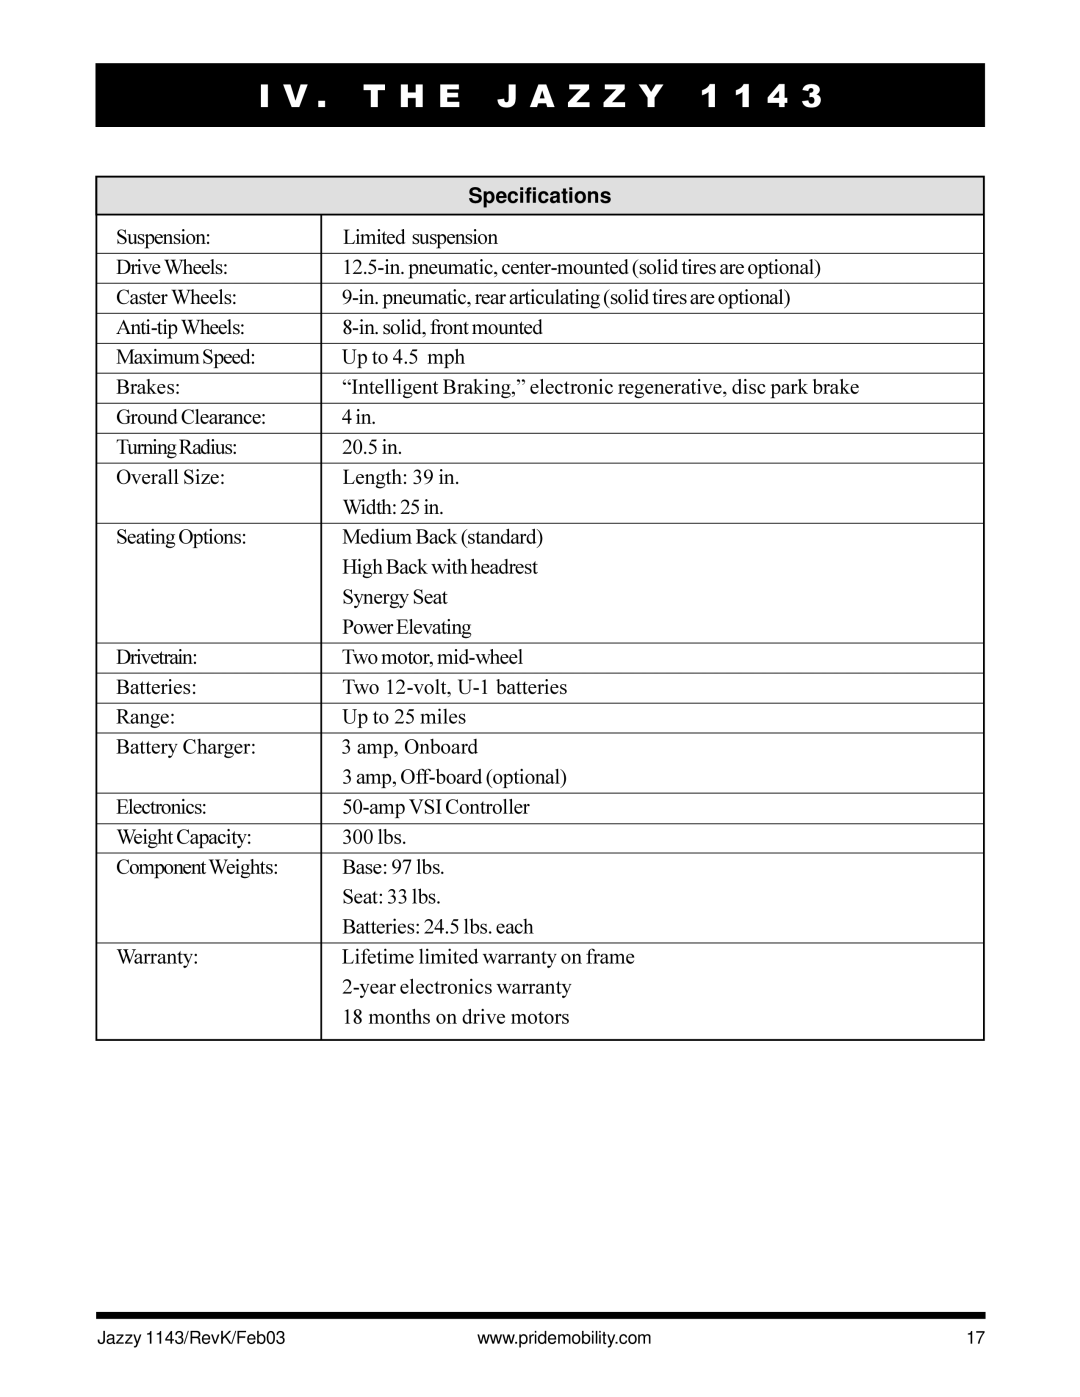 Pride Mobility Jazzy 1143 owner manual Specifications 